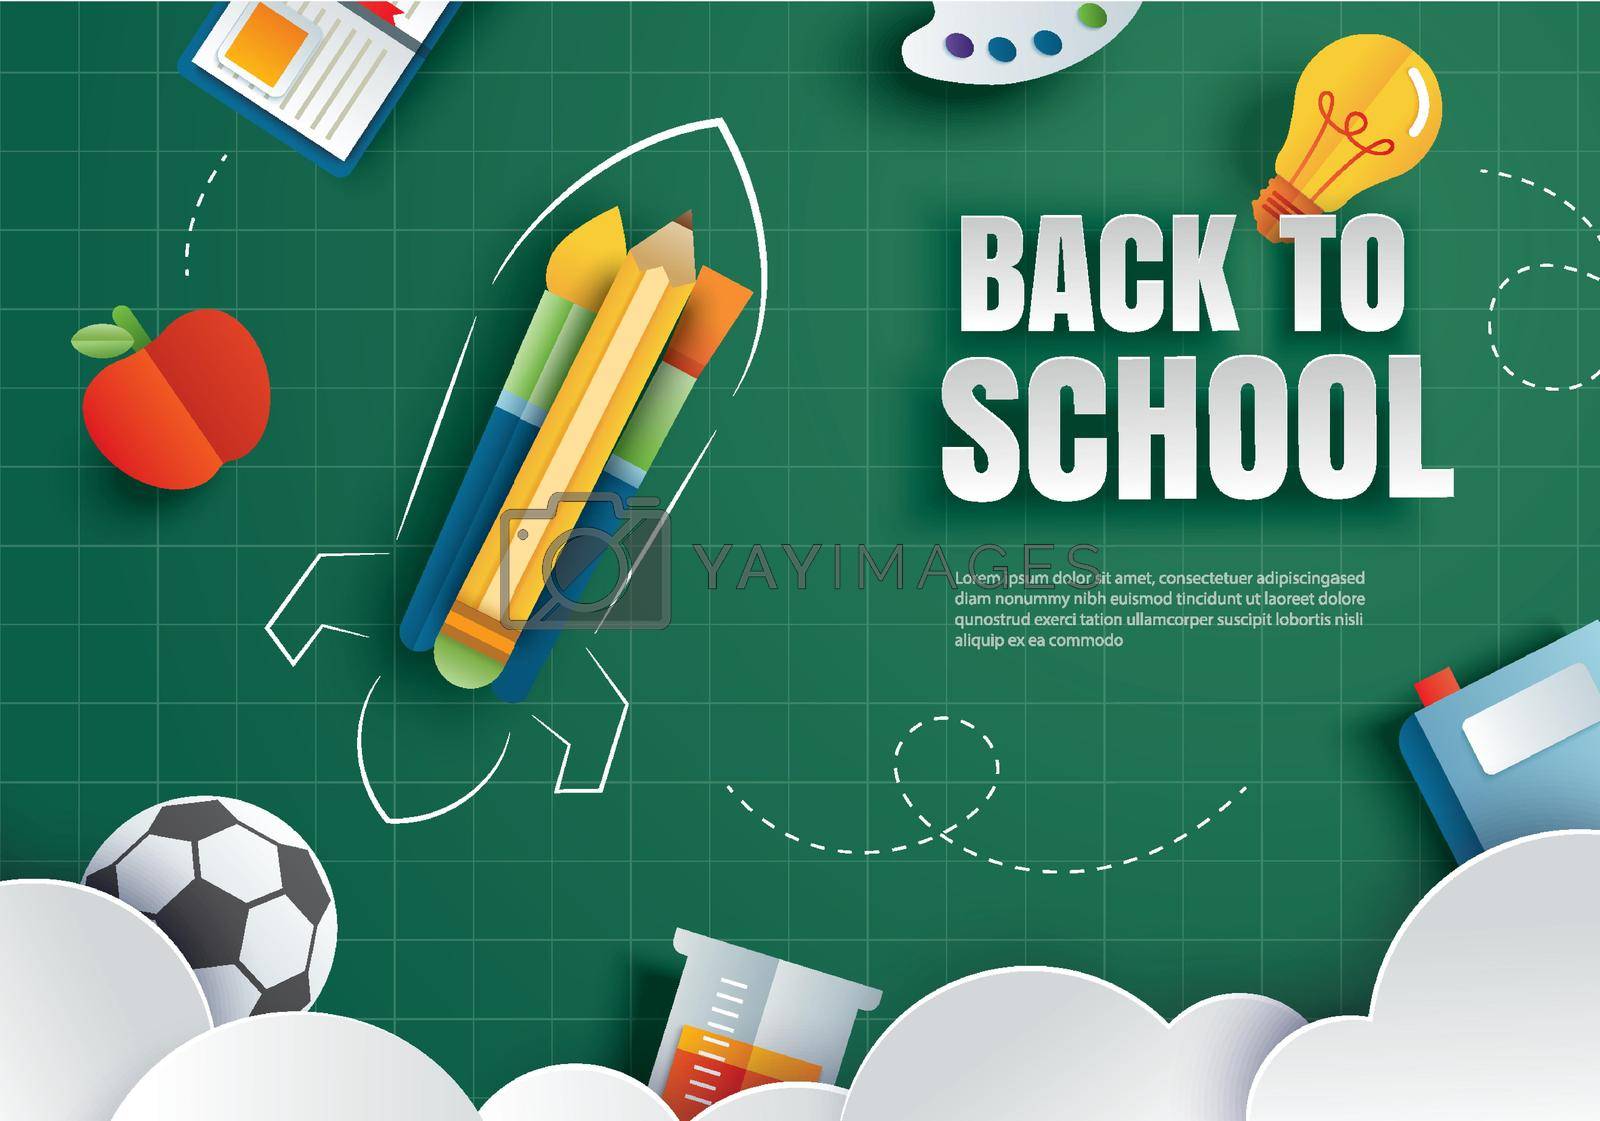 Royalty free image of Back to school with education items on green chalkboard background in paper art style. by kaisorn